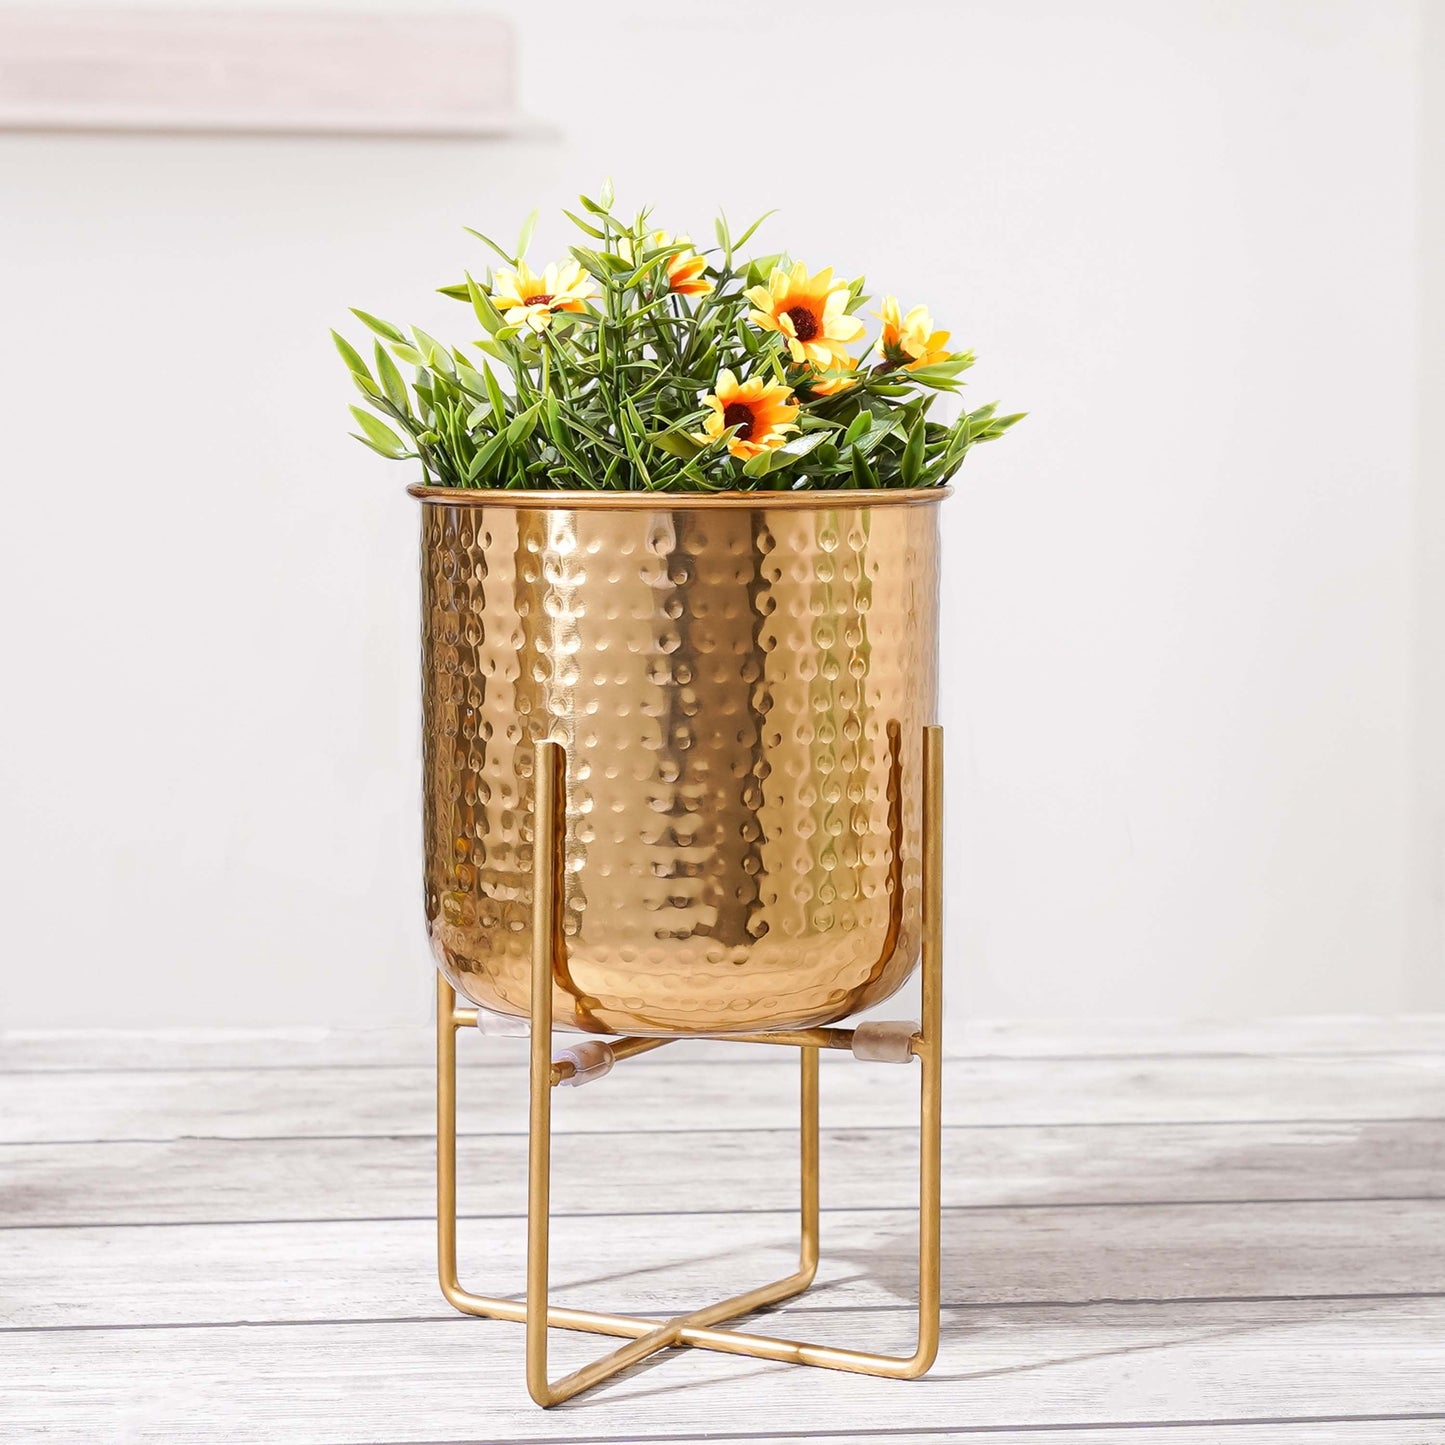 Metal Hammered gold planter, Small